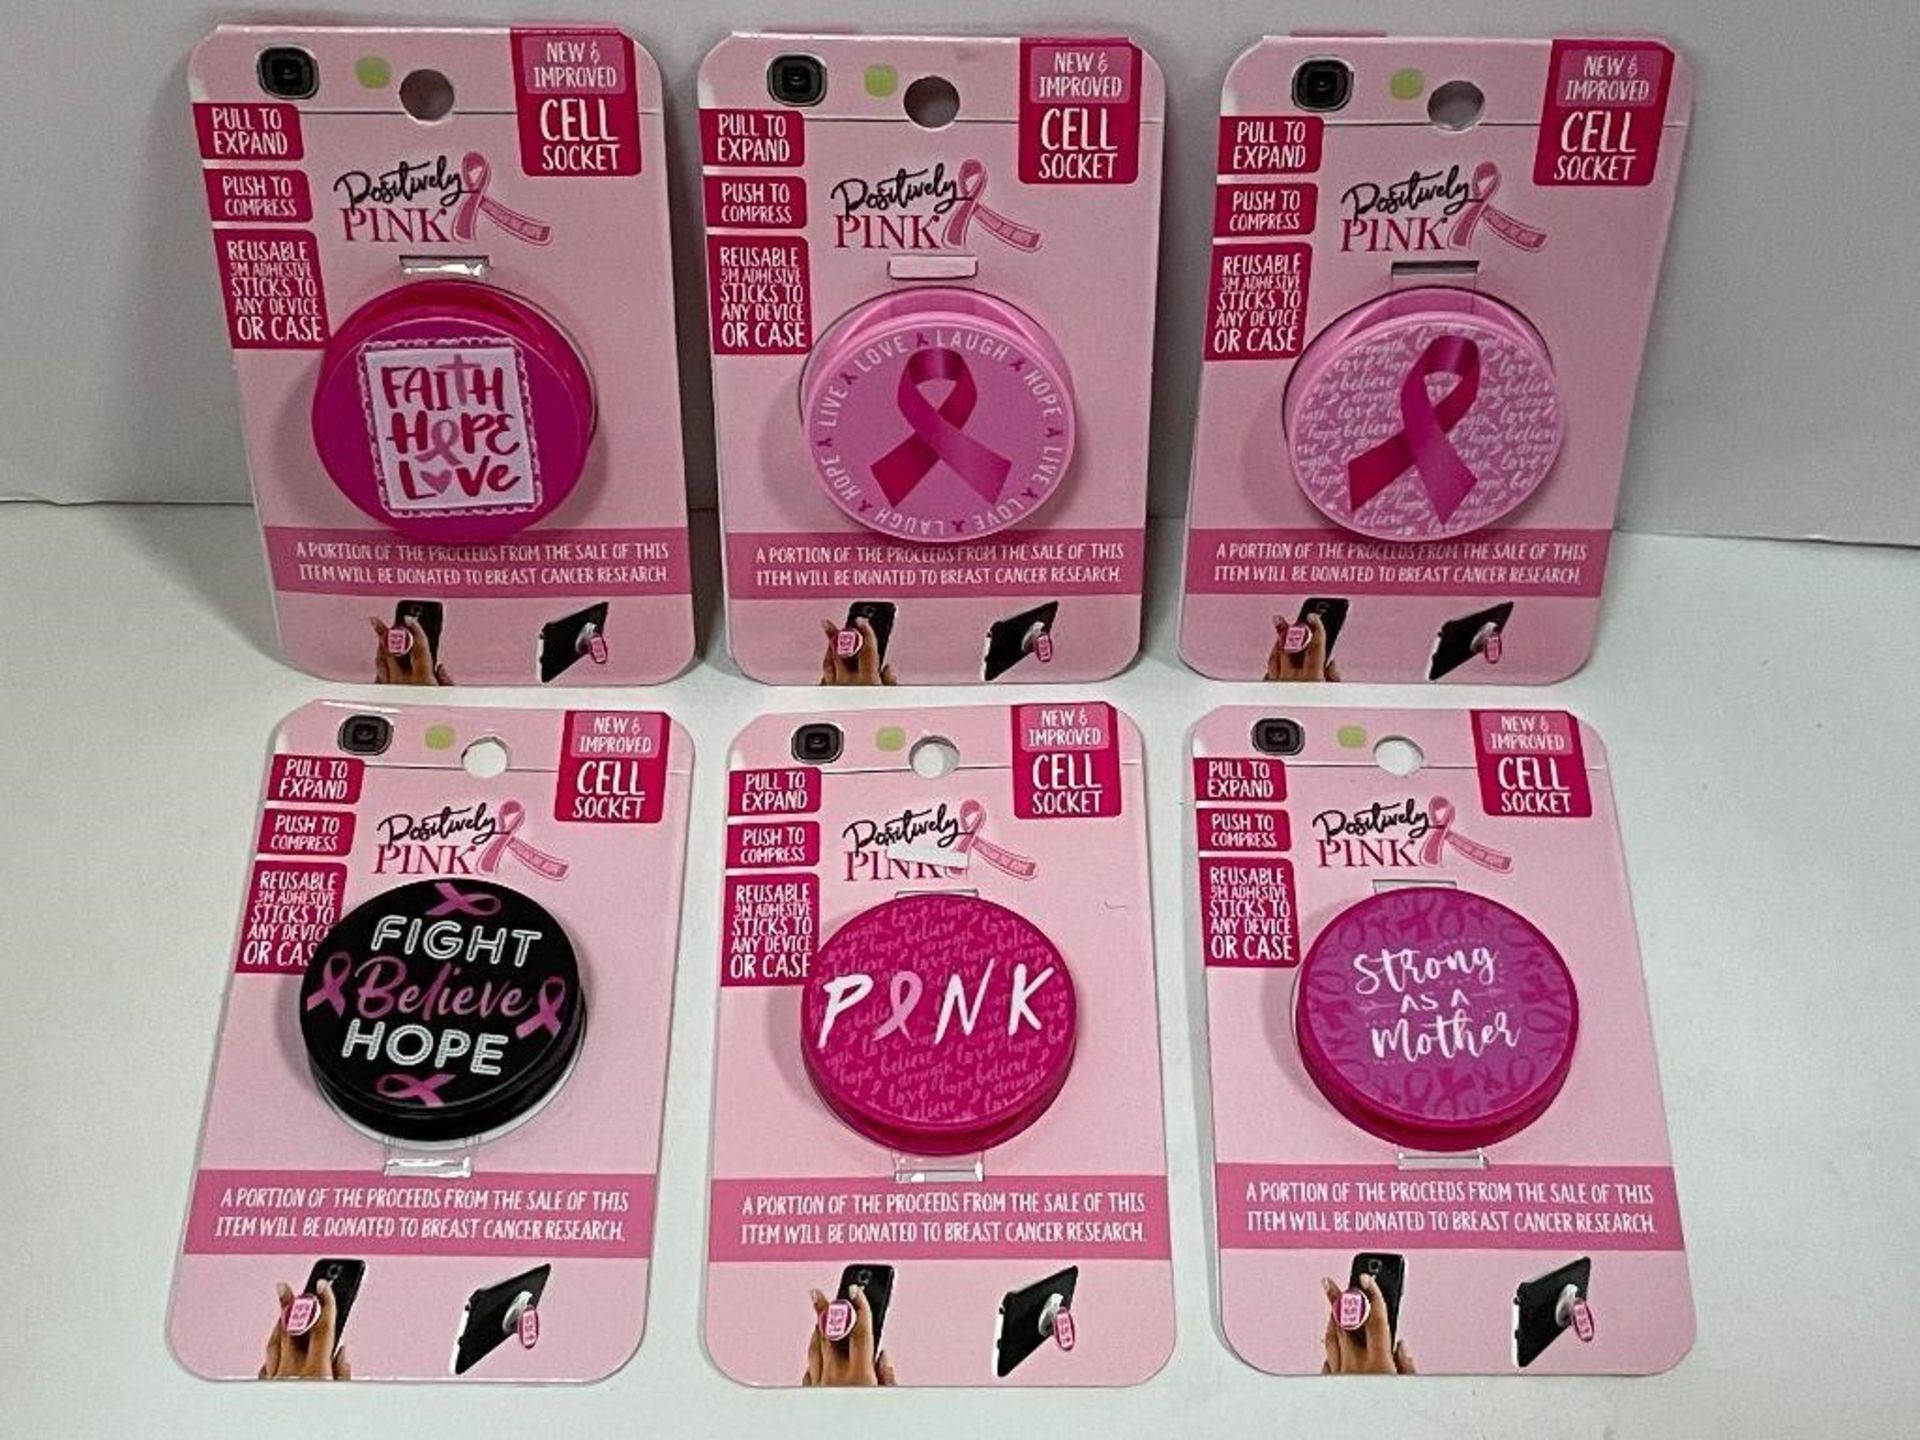 6 X BREAST CANCER PINK CELLPHONE POP UP SOCKETS. ATTACH TO THE BACK OF YOUR CELLPHONE AND POP UP TO